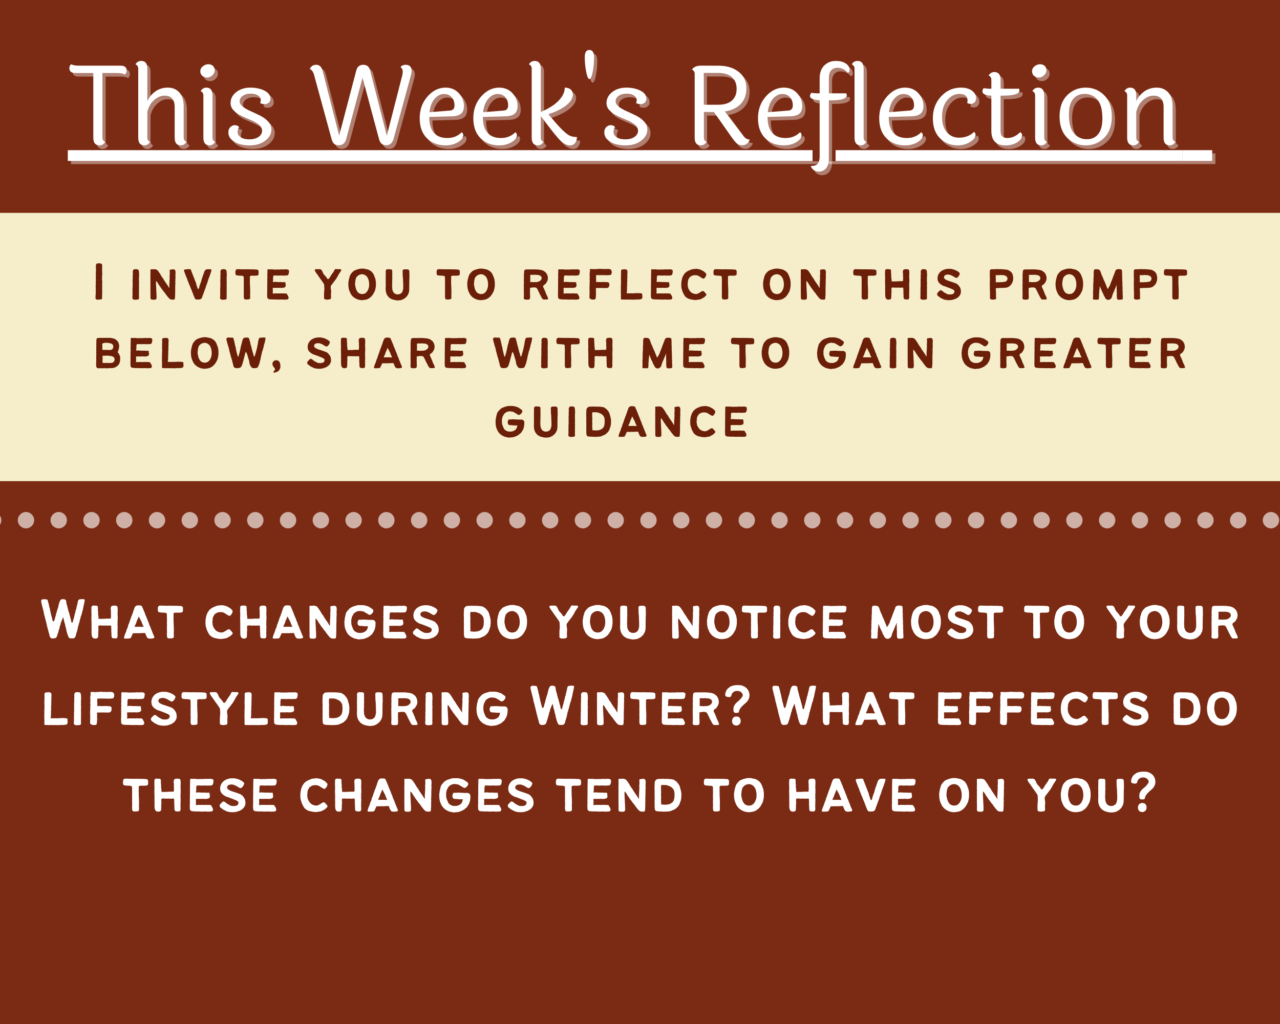 This Week's Reflection on Changes to Your Lifestyle During Winter